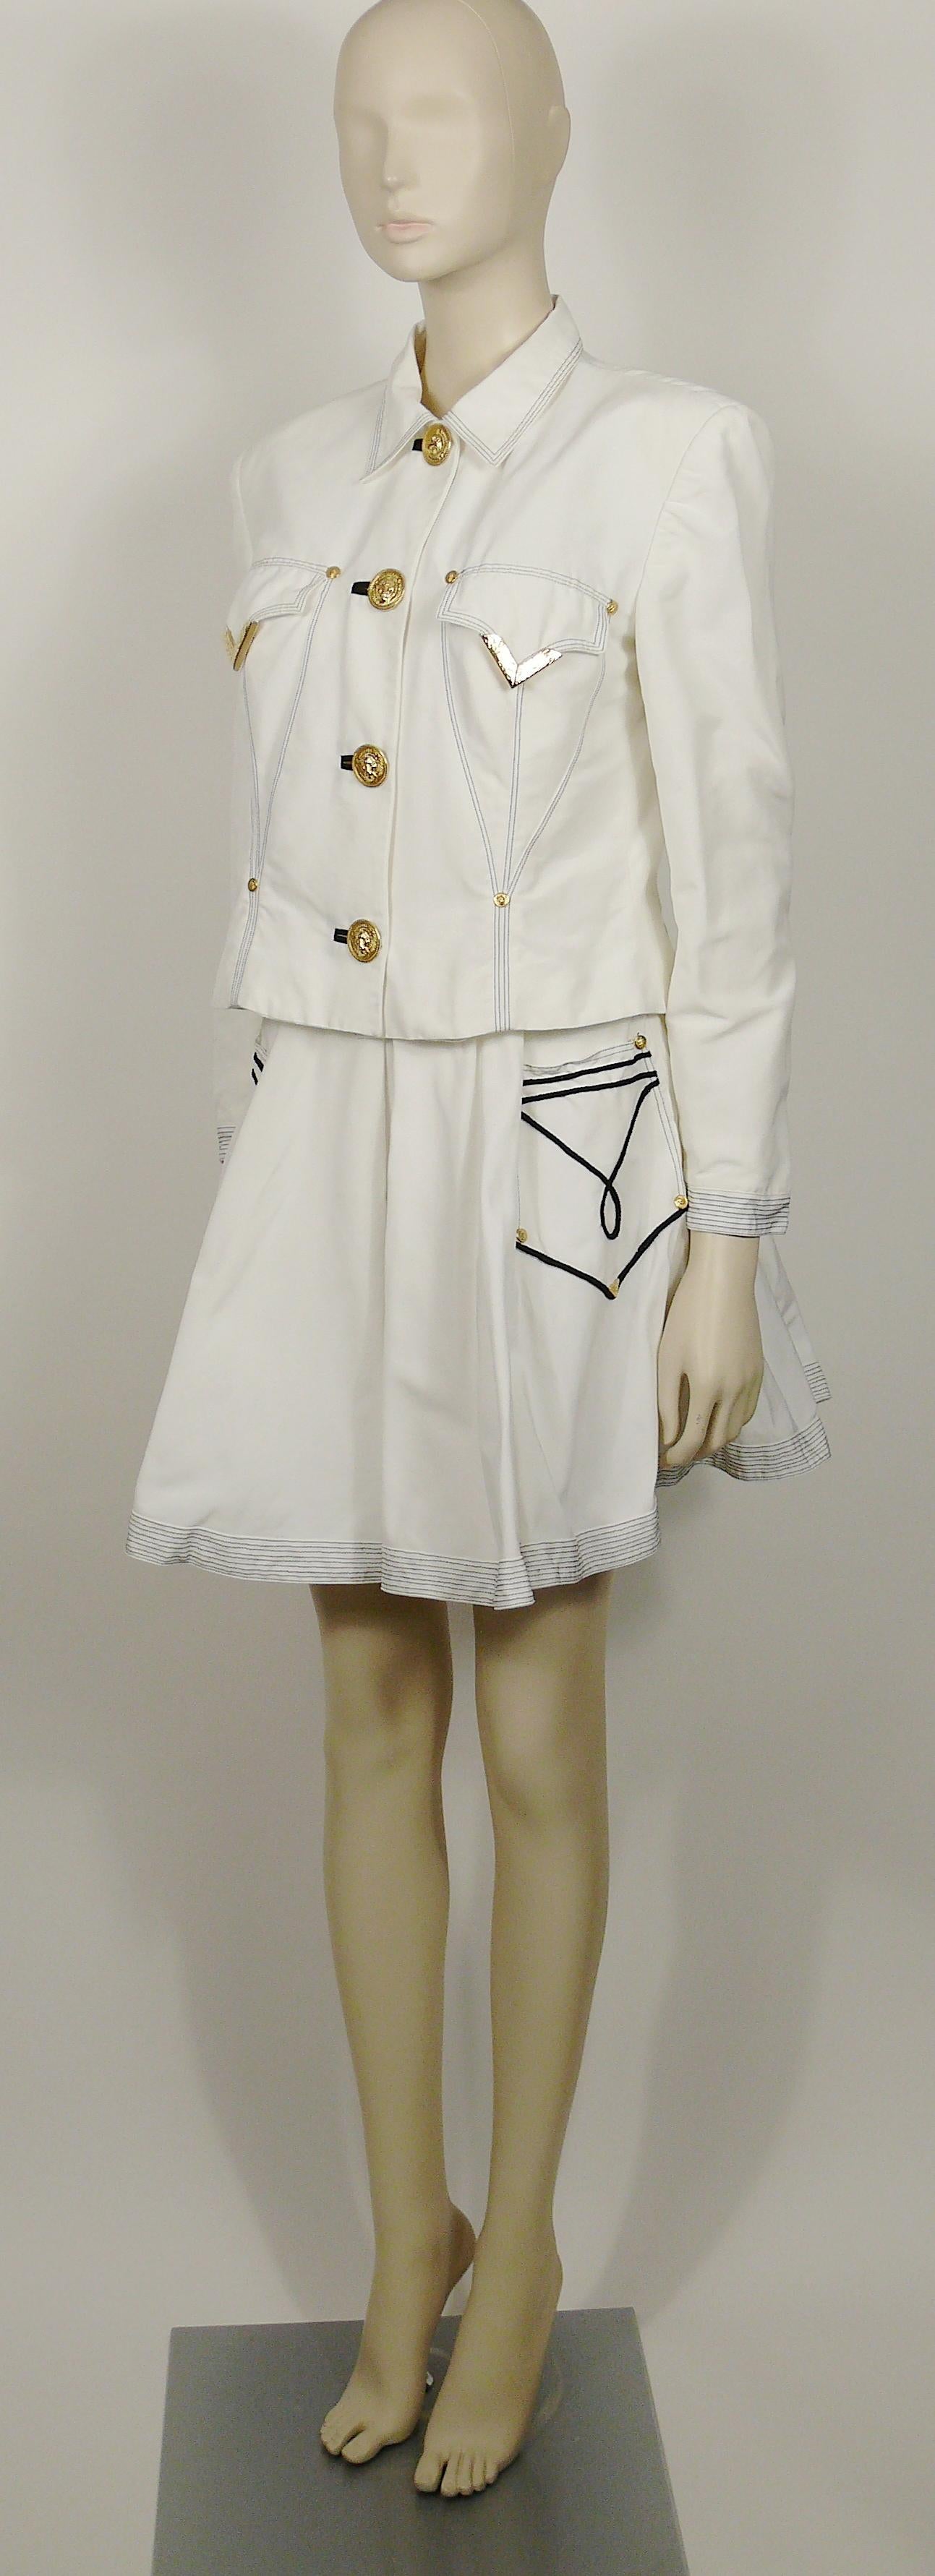 Gray Gianni Versace Versus Vintage White Jacket & Skirt Ensemble with Western Details For Sale